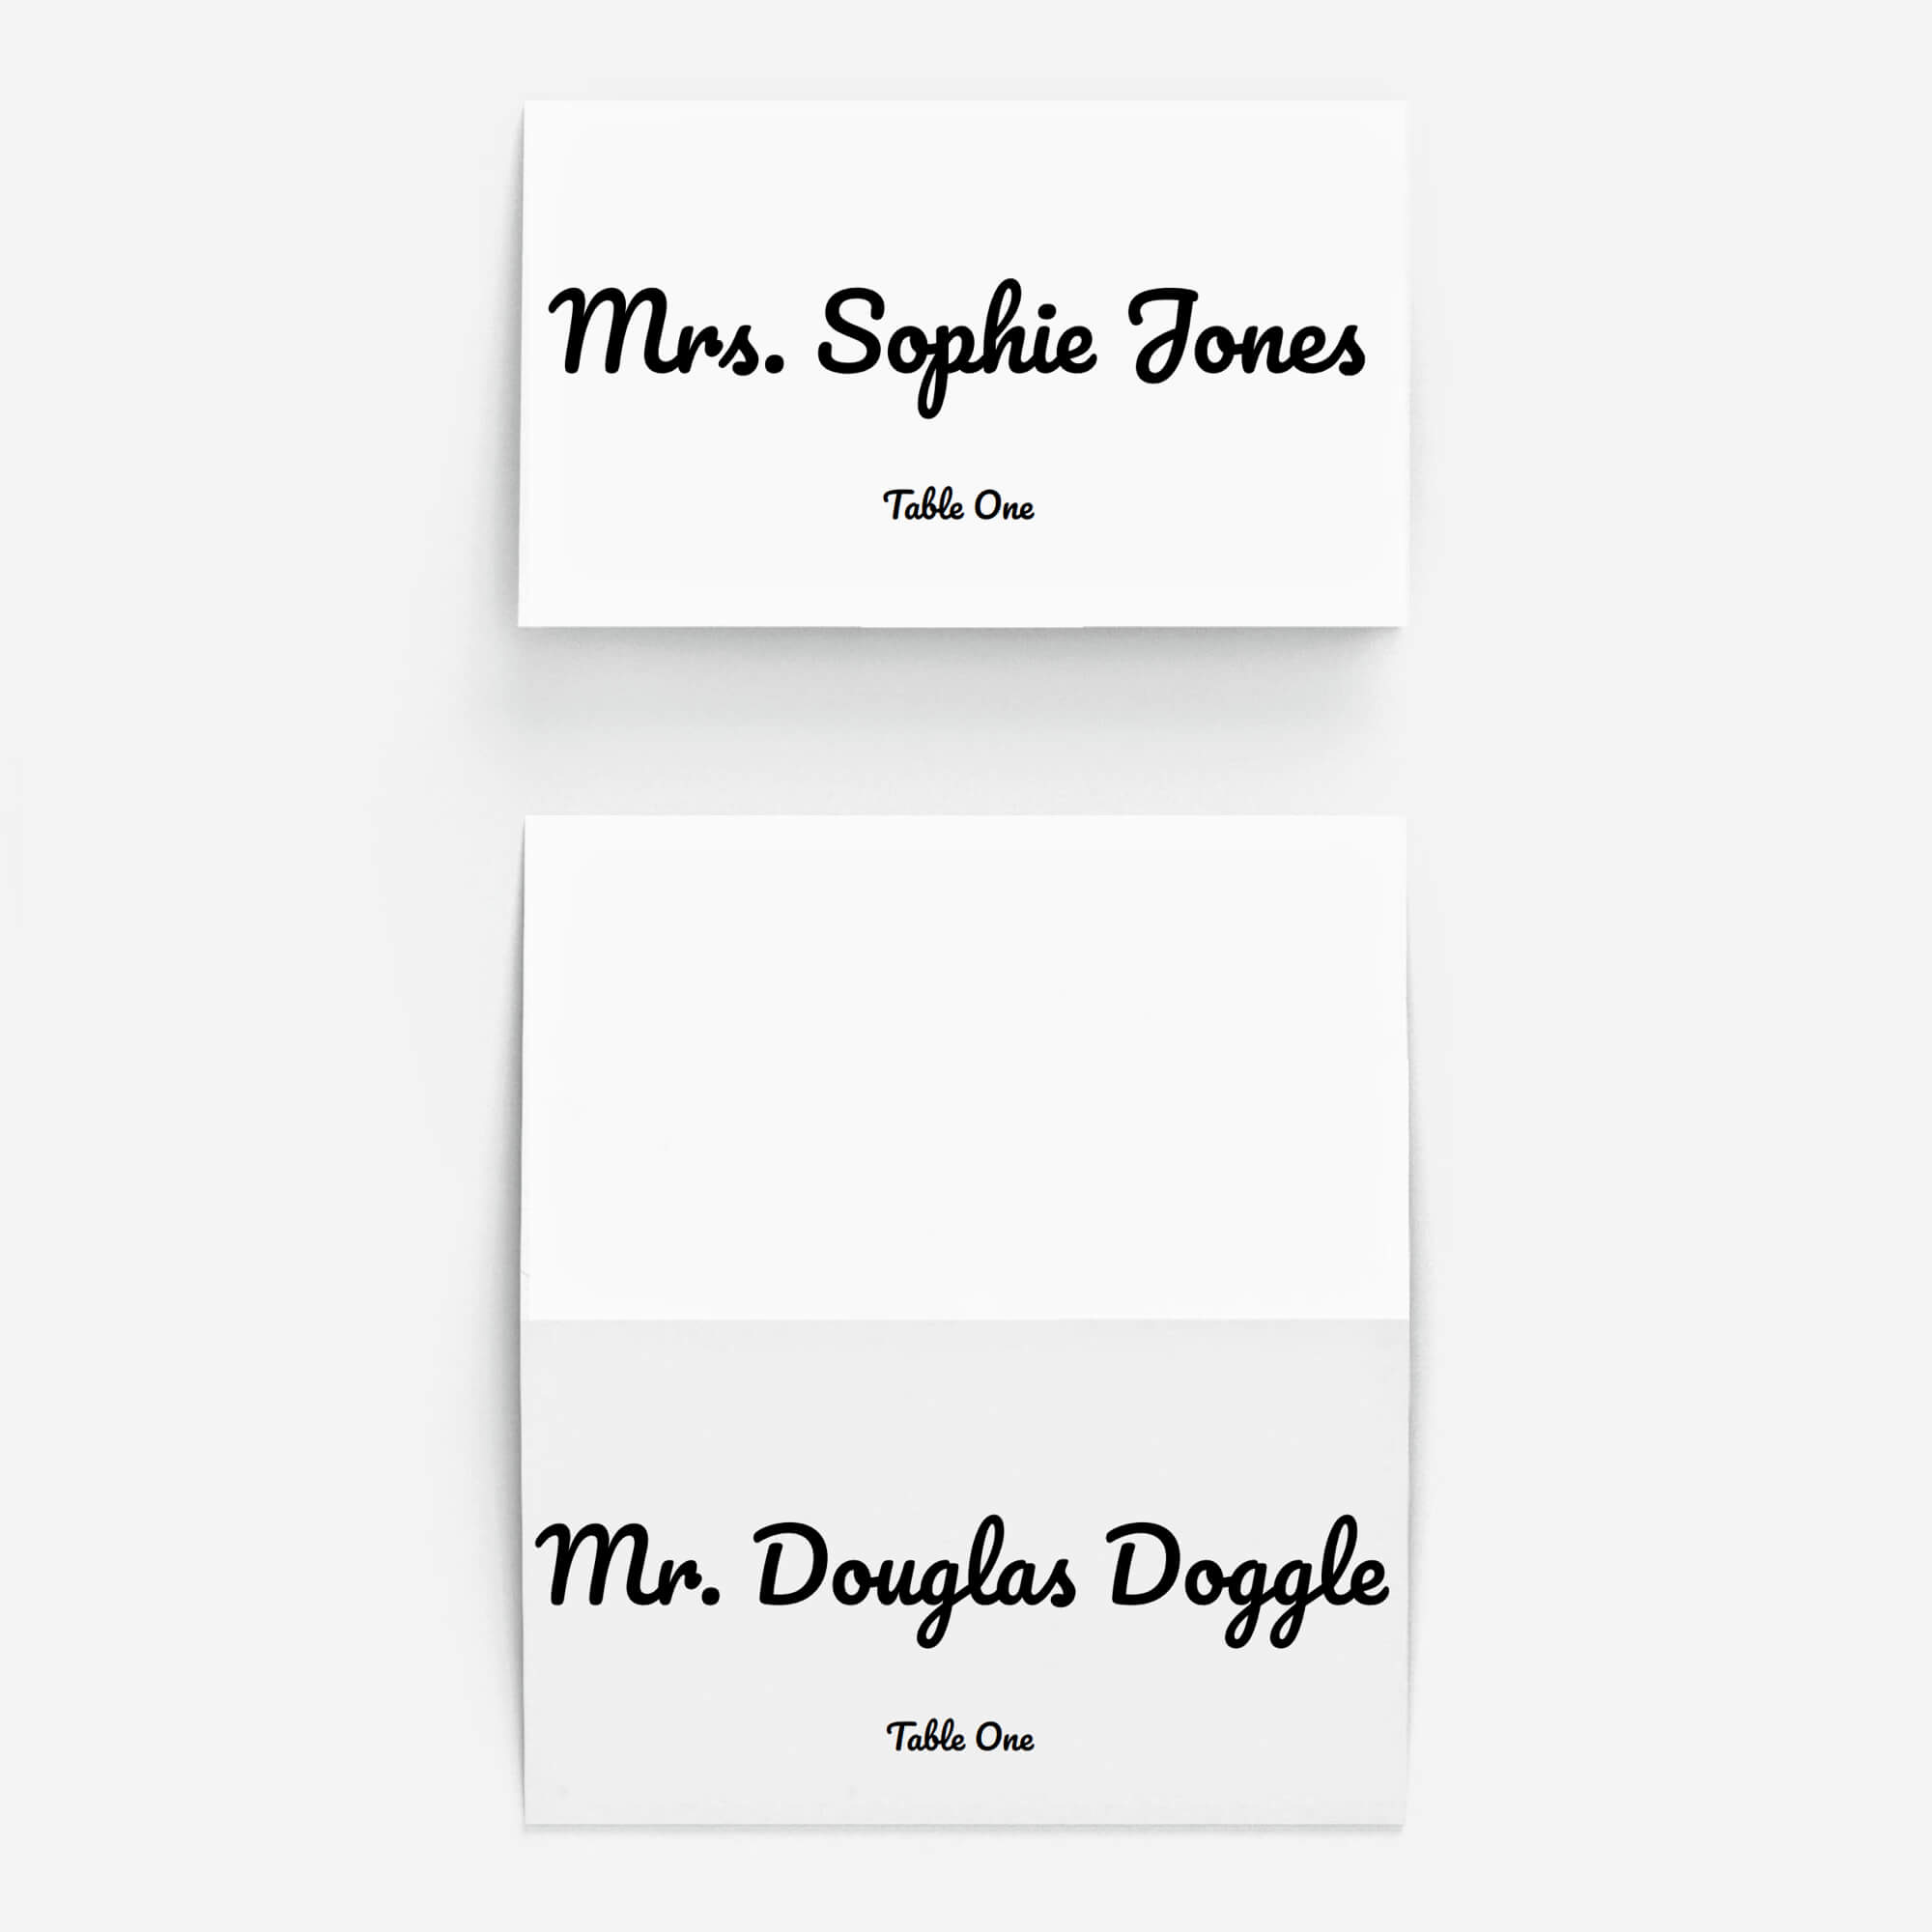 Pinplace Cards Online On 10 Stunning Fonts For Diy Throughout Celebrate It Templates Place Cards